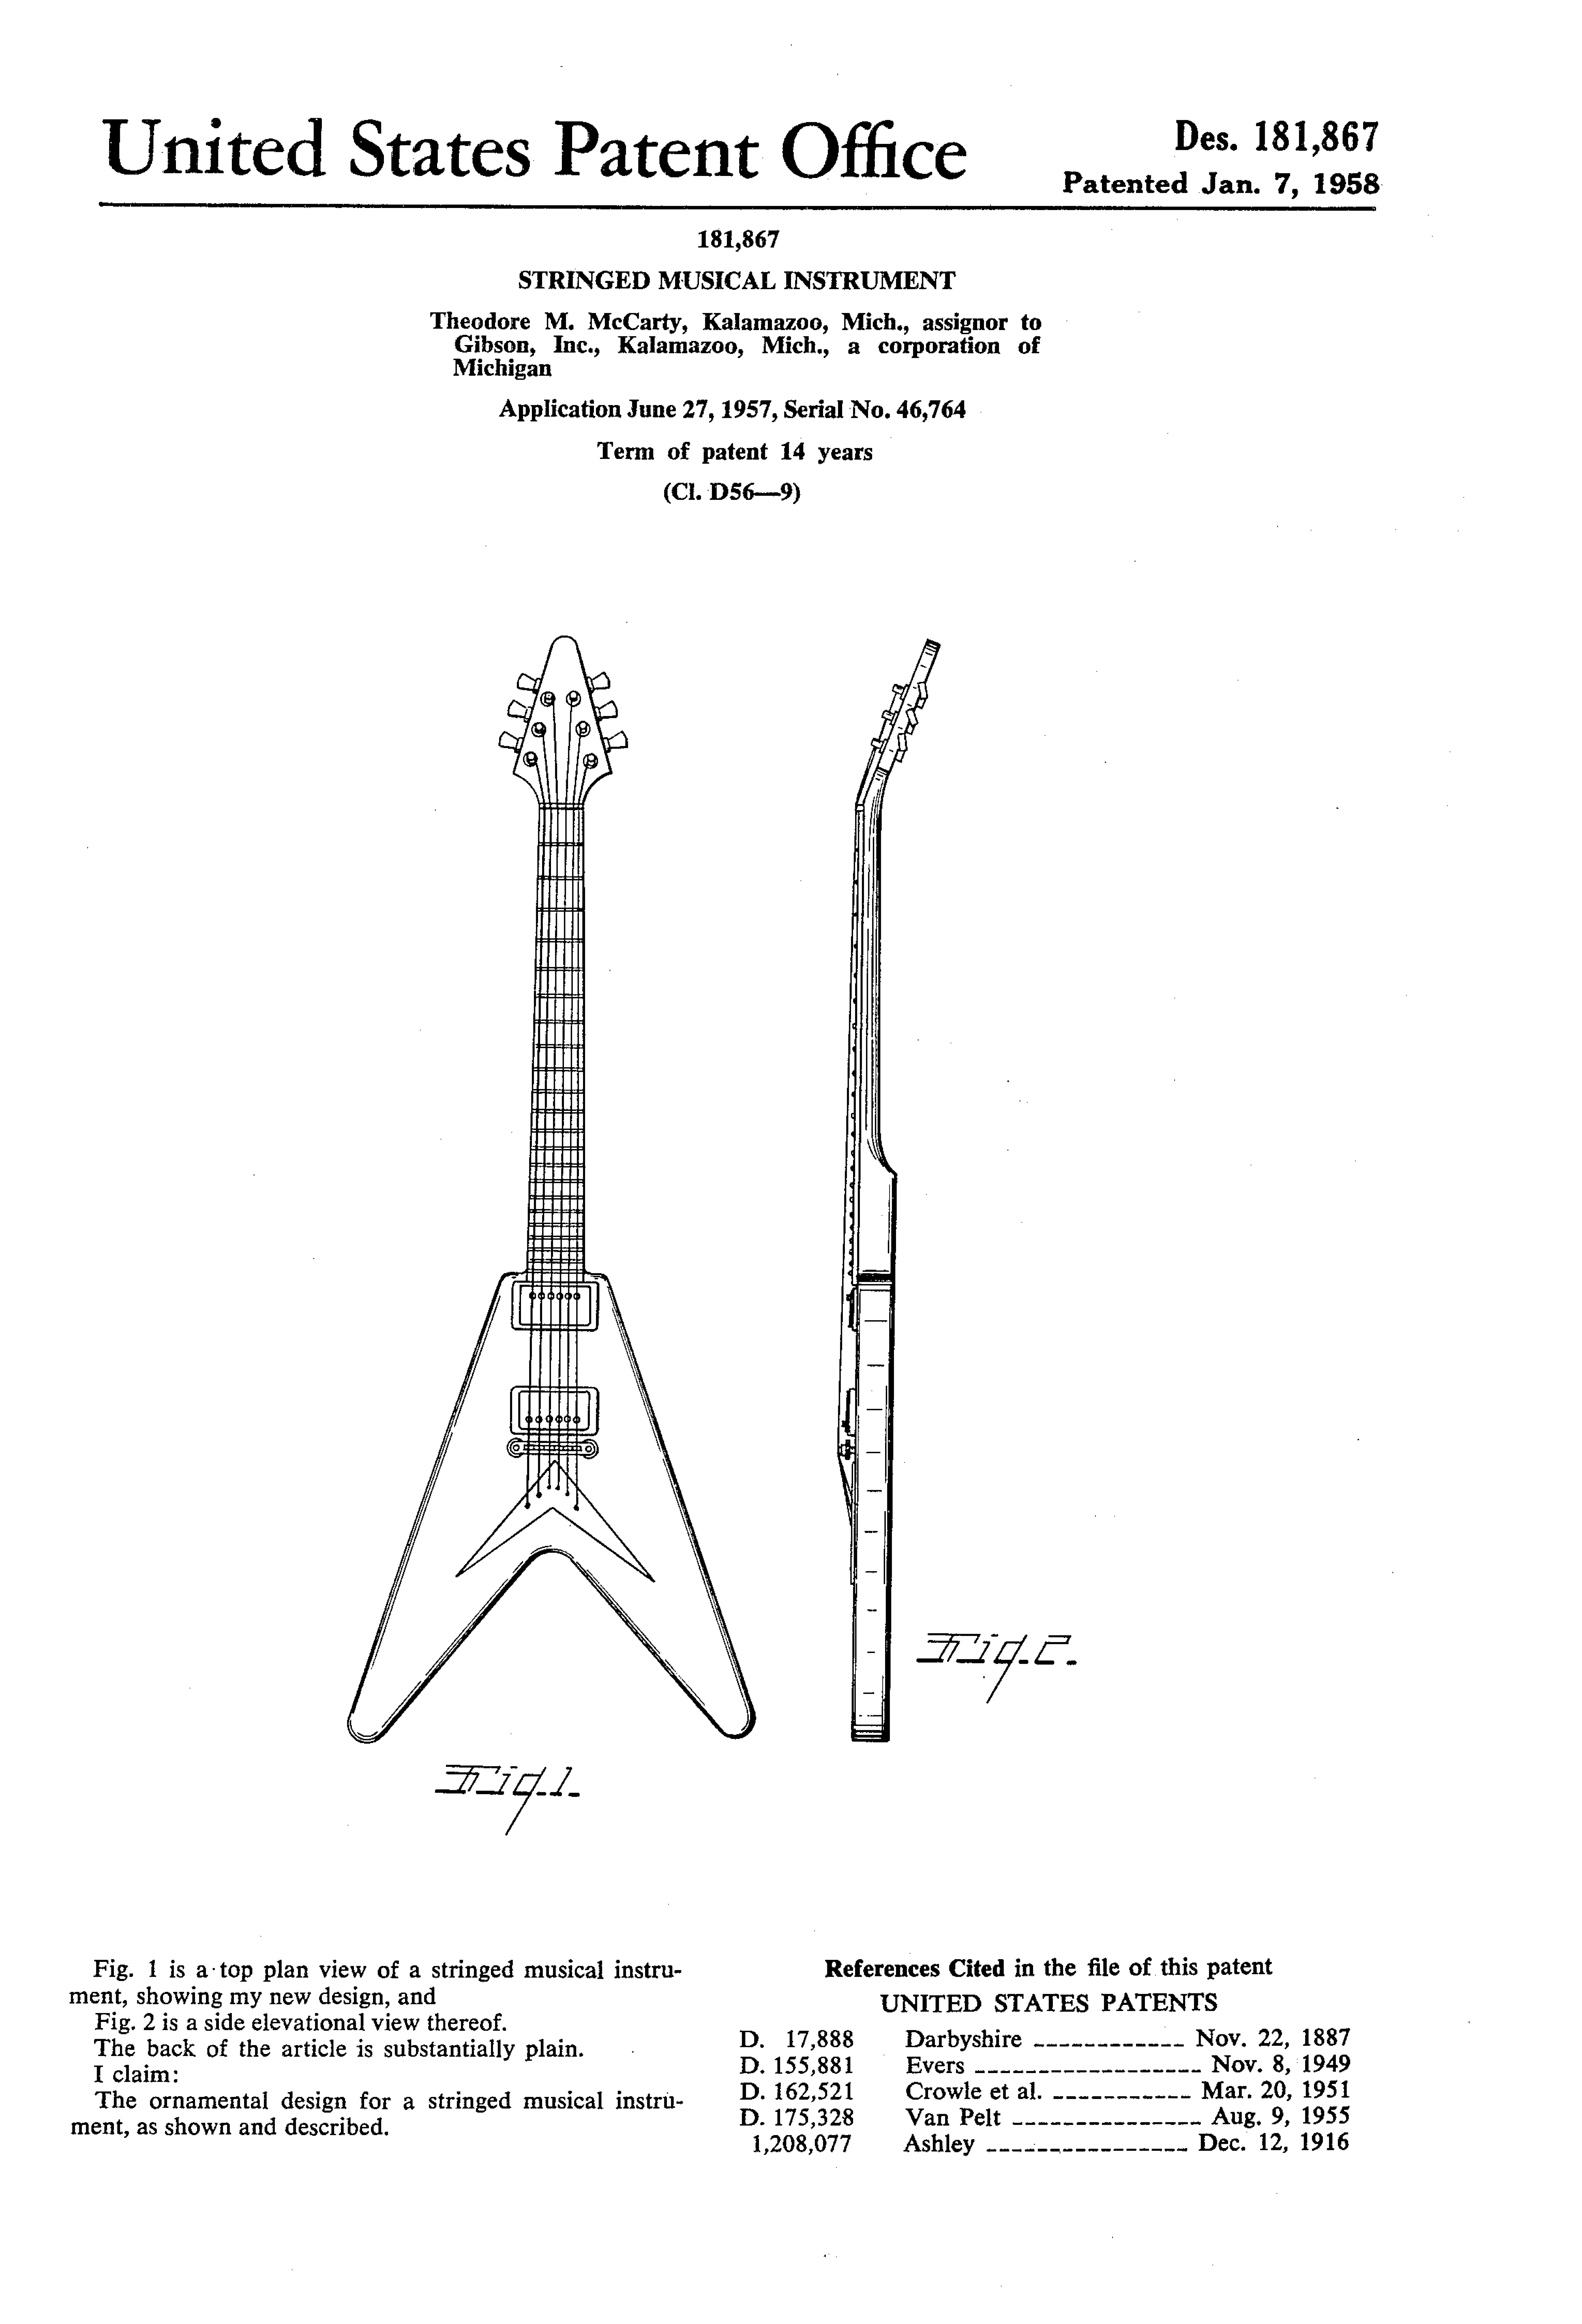 Stringed Musical Instrument, Theodore M. McCarty, for Gibson, 1957/1958. Patent Number: USD 181,867, U.S. Patent Office